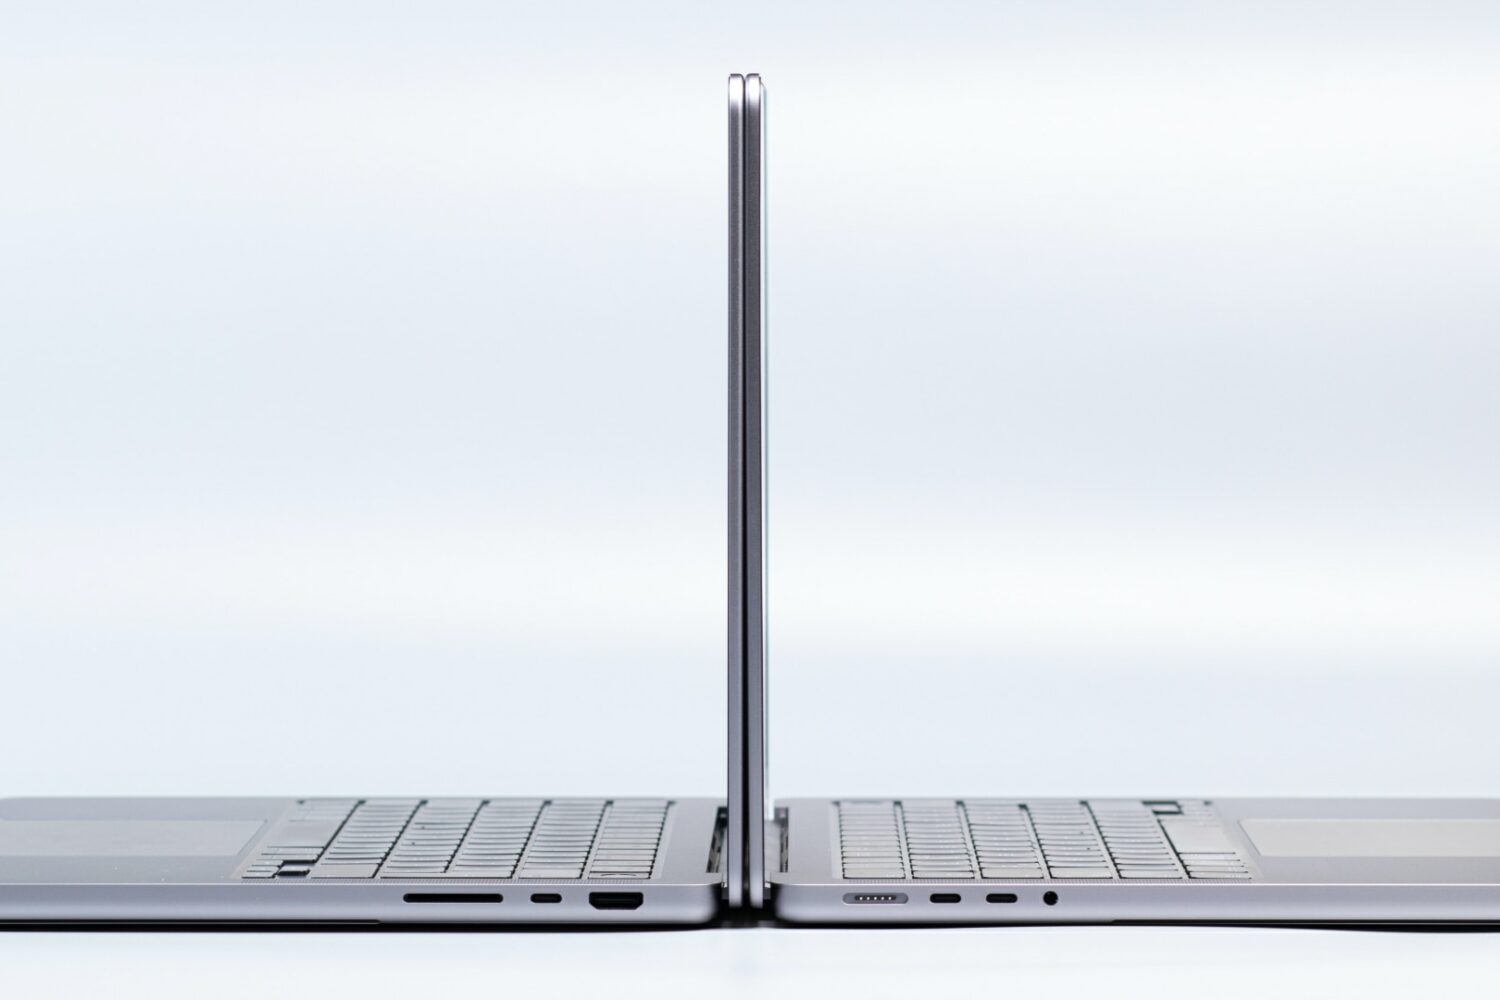 Two MacBook Pro laptops side by side, with their lids open